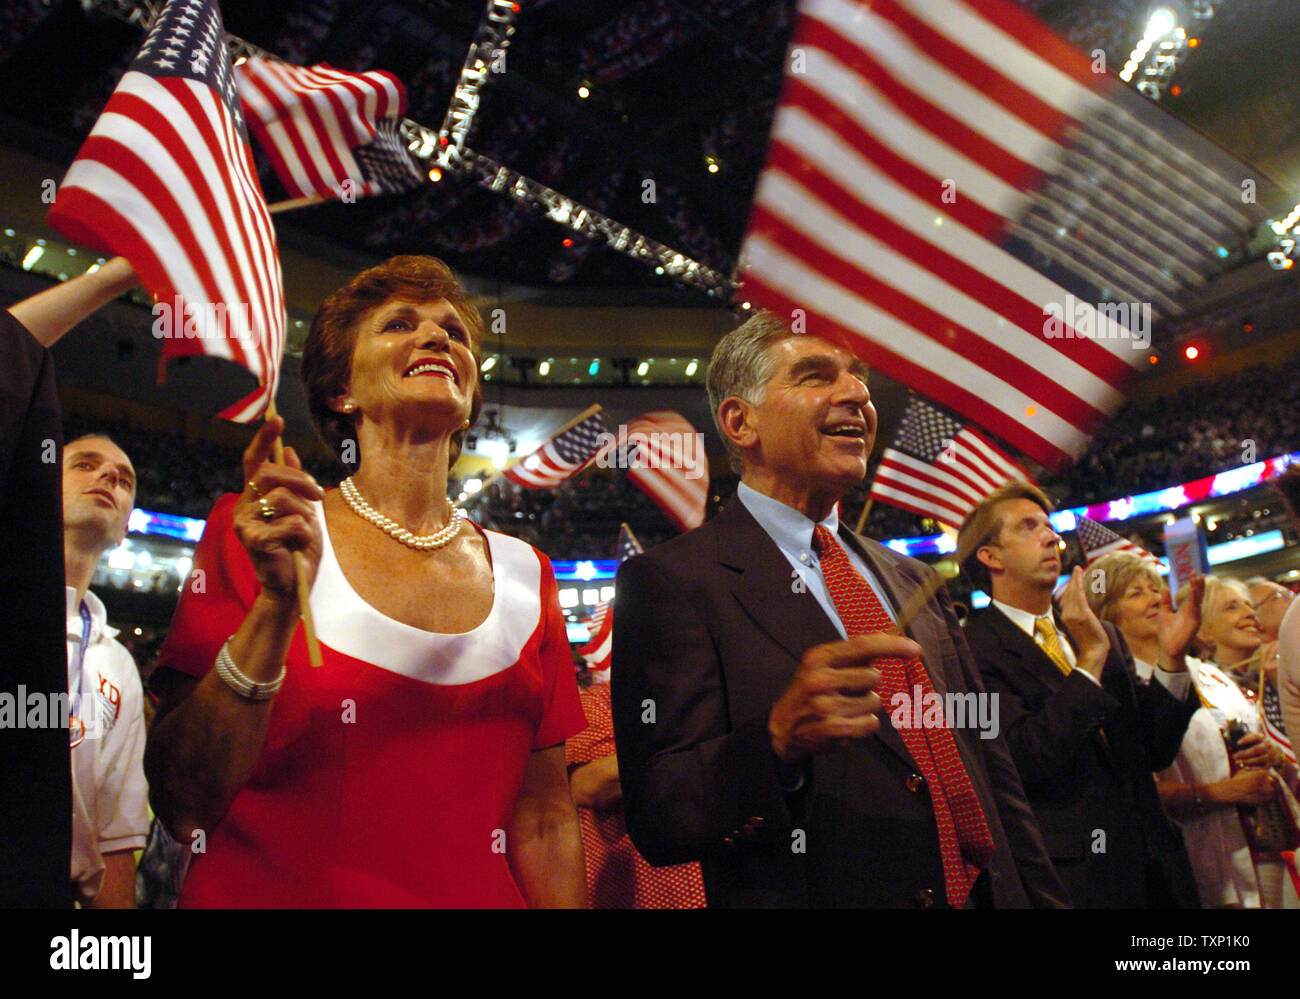 Former Mass. Gov. Michael Dukakis and his wife Kitty wave flags during 'Small Town' by John Mellencamp on day three of the Democratic National Convention at the FleetCenter in Boston on July 28, 2004.  (UPI Photo/Greg Whitesell) Stock Photo